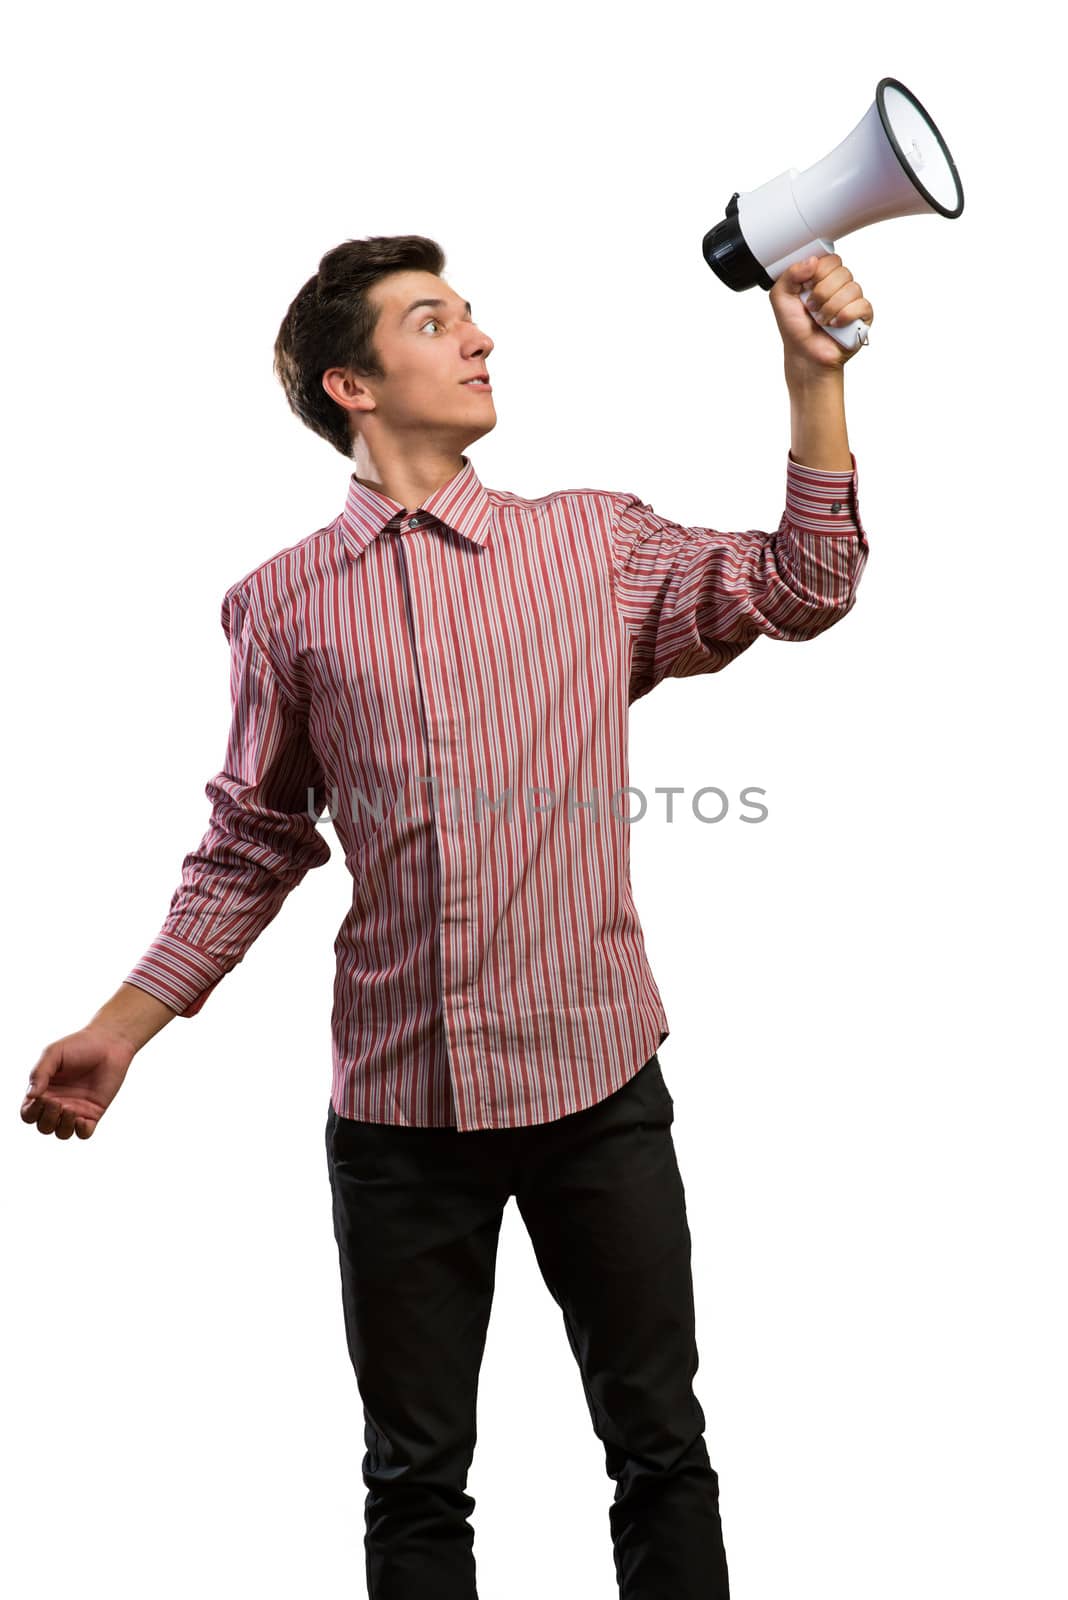 man shouts through a megaphone. isolated on white background